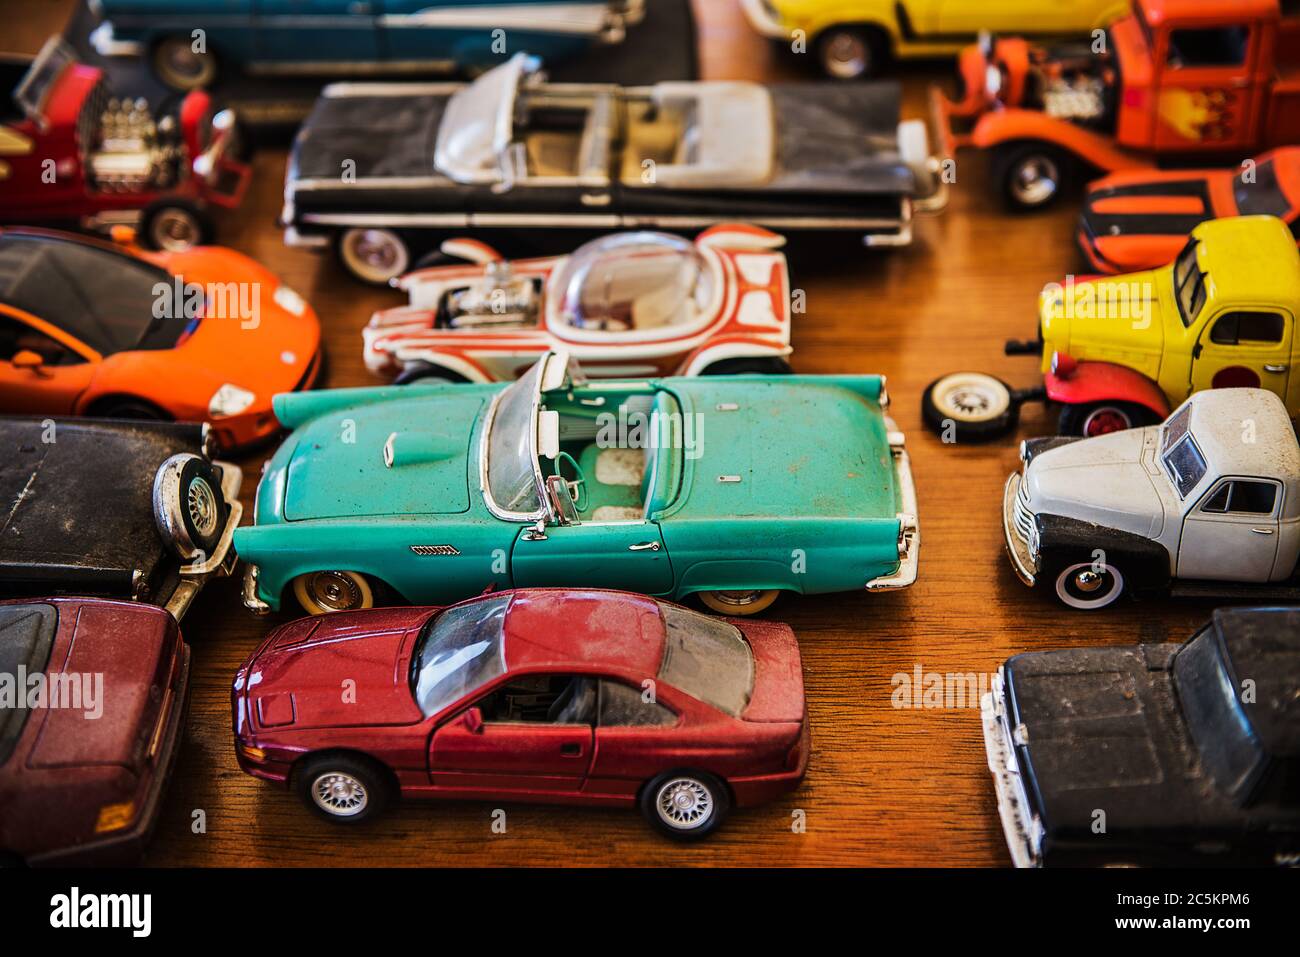 Antique toy cars for sale at the flea market, brimfield, massachusetts Stock Photo